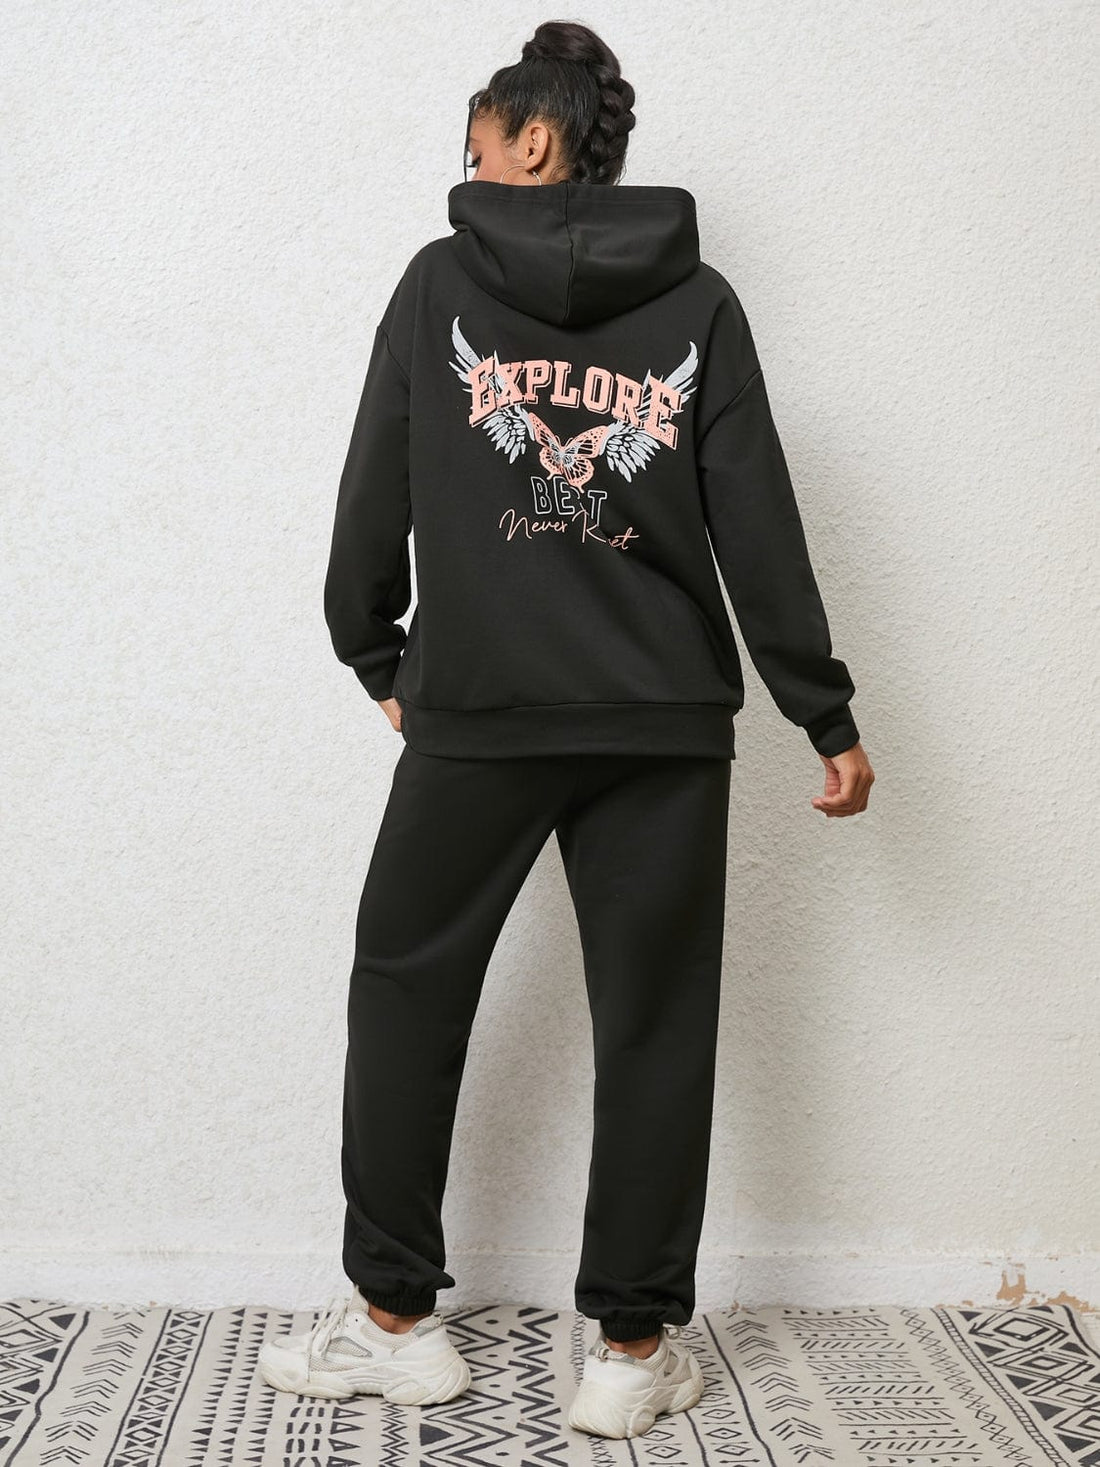 "An image featuring a stylish Unique Kulture Graphic Hoodie and Sweatpants Set. The hoodie is adorned with a vibrant and intricate graphic design, while the matching sweatpants complete the ensemble. The set exudes a trendy and urban fashion vibe, perfect for casual and comfortable wear."